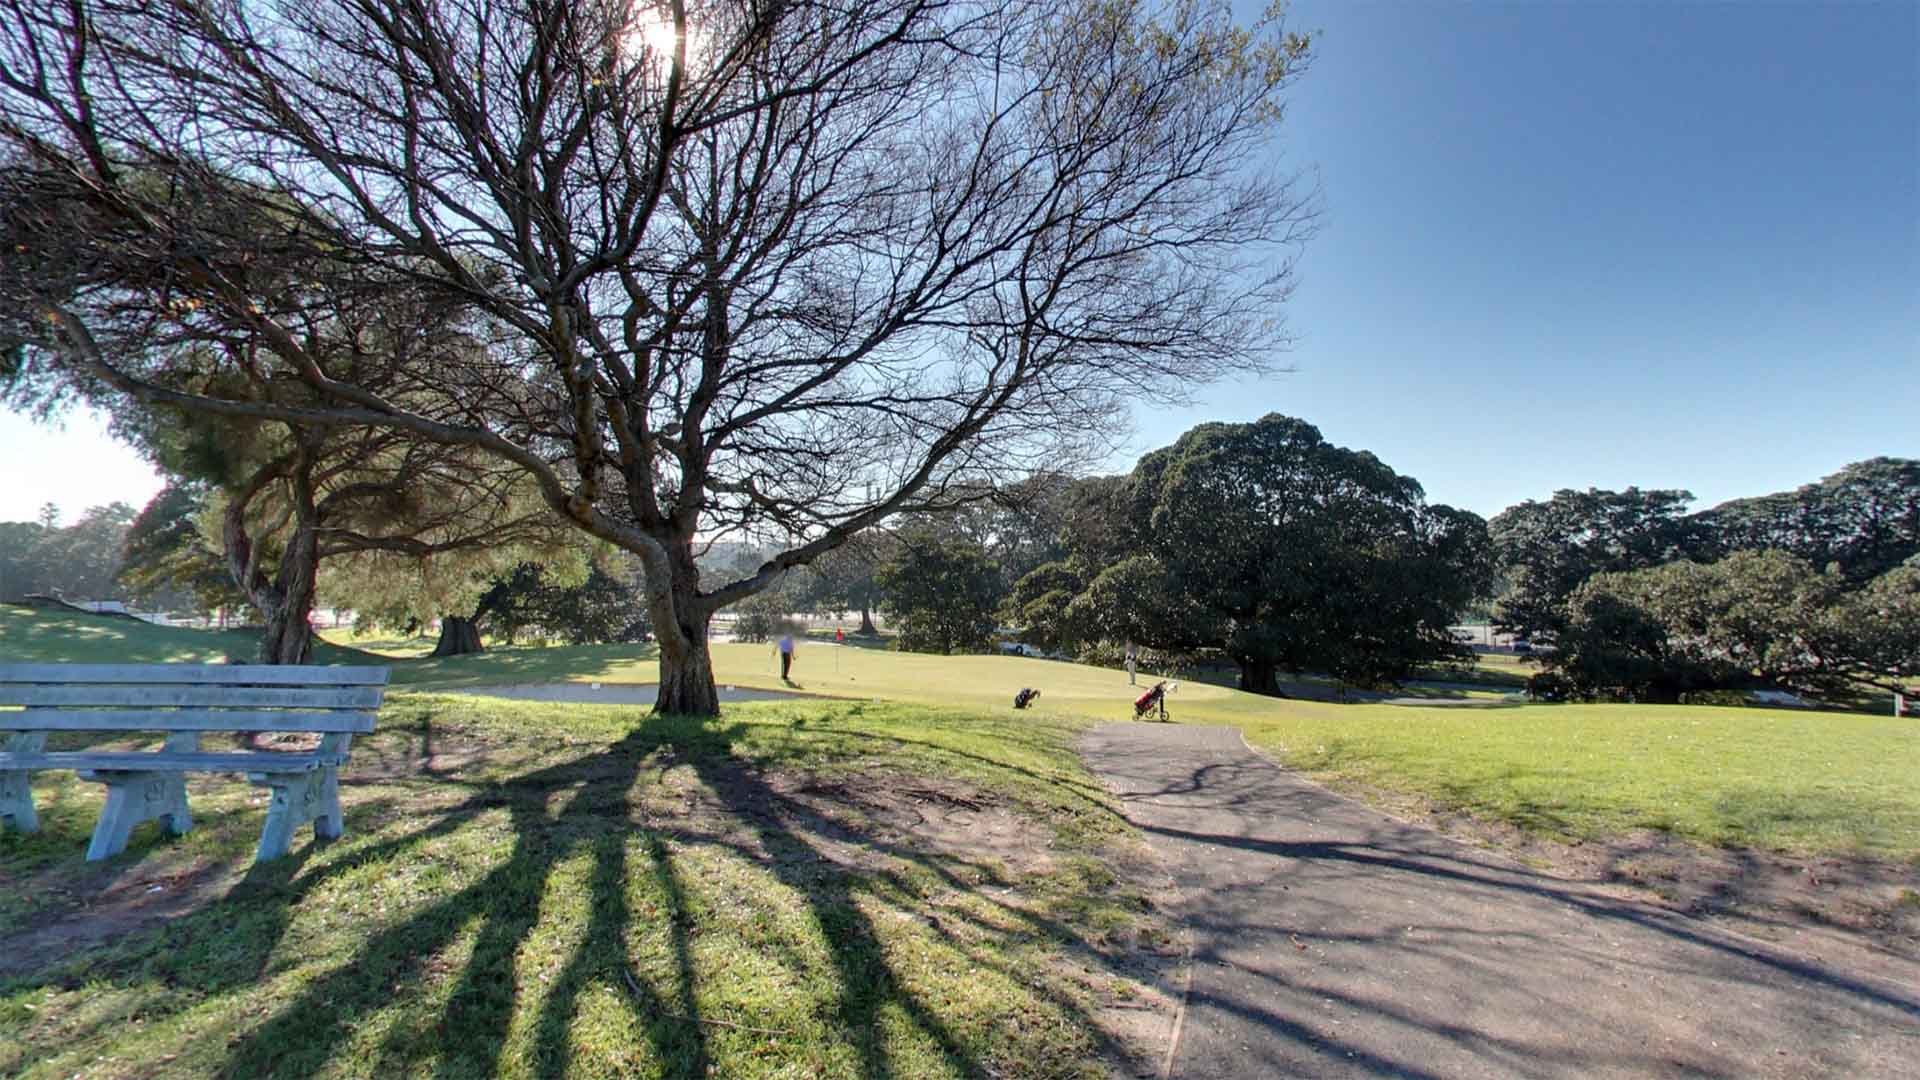 The City of Sydney Is Considering Reclaiming 20 Hectares of Moore Park Golf Course for Public Use